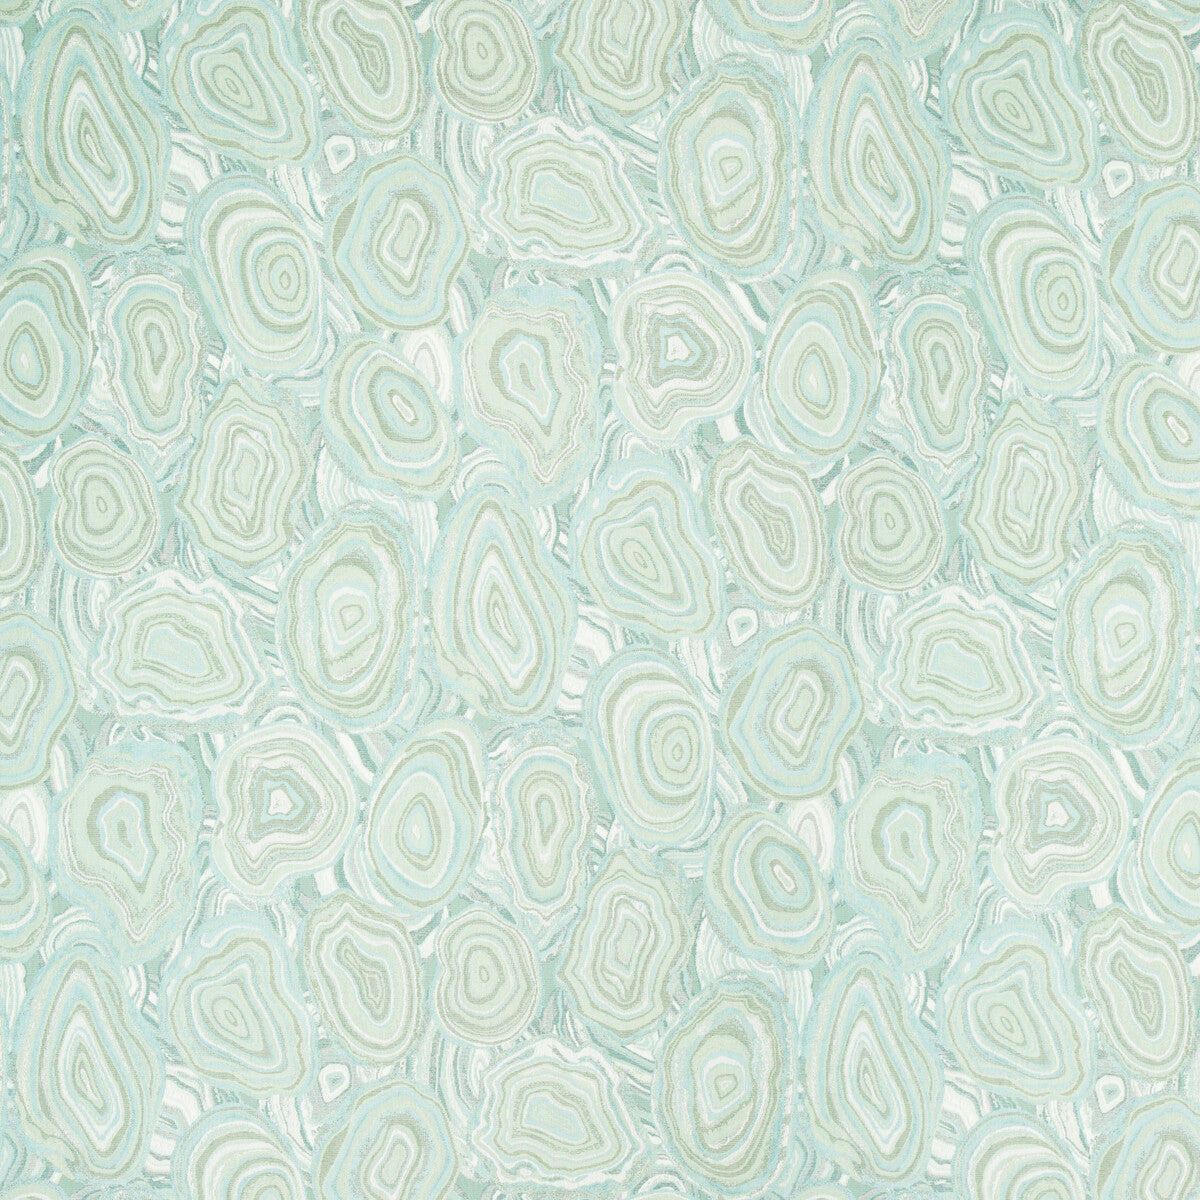 Kravet Design fabric in 34707-13 color - pattern 34707.13.0 - by Kravet Design in the Crypton Home collection